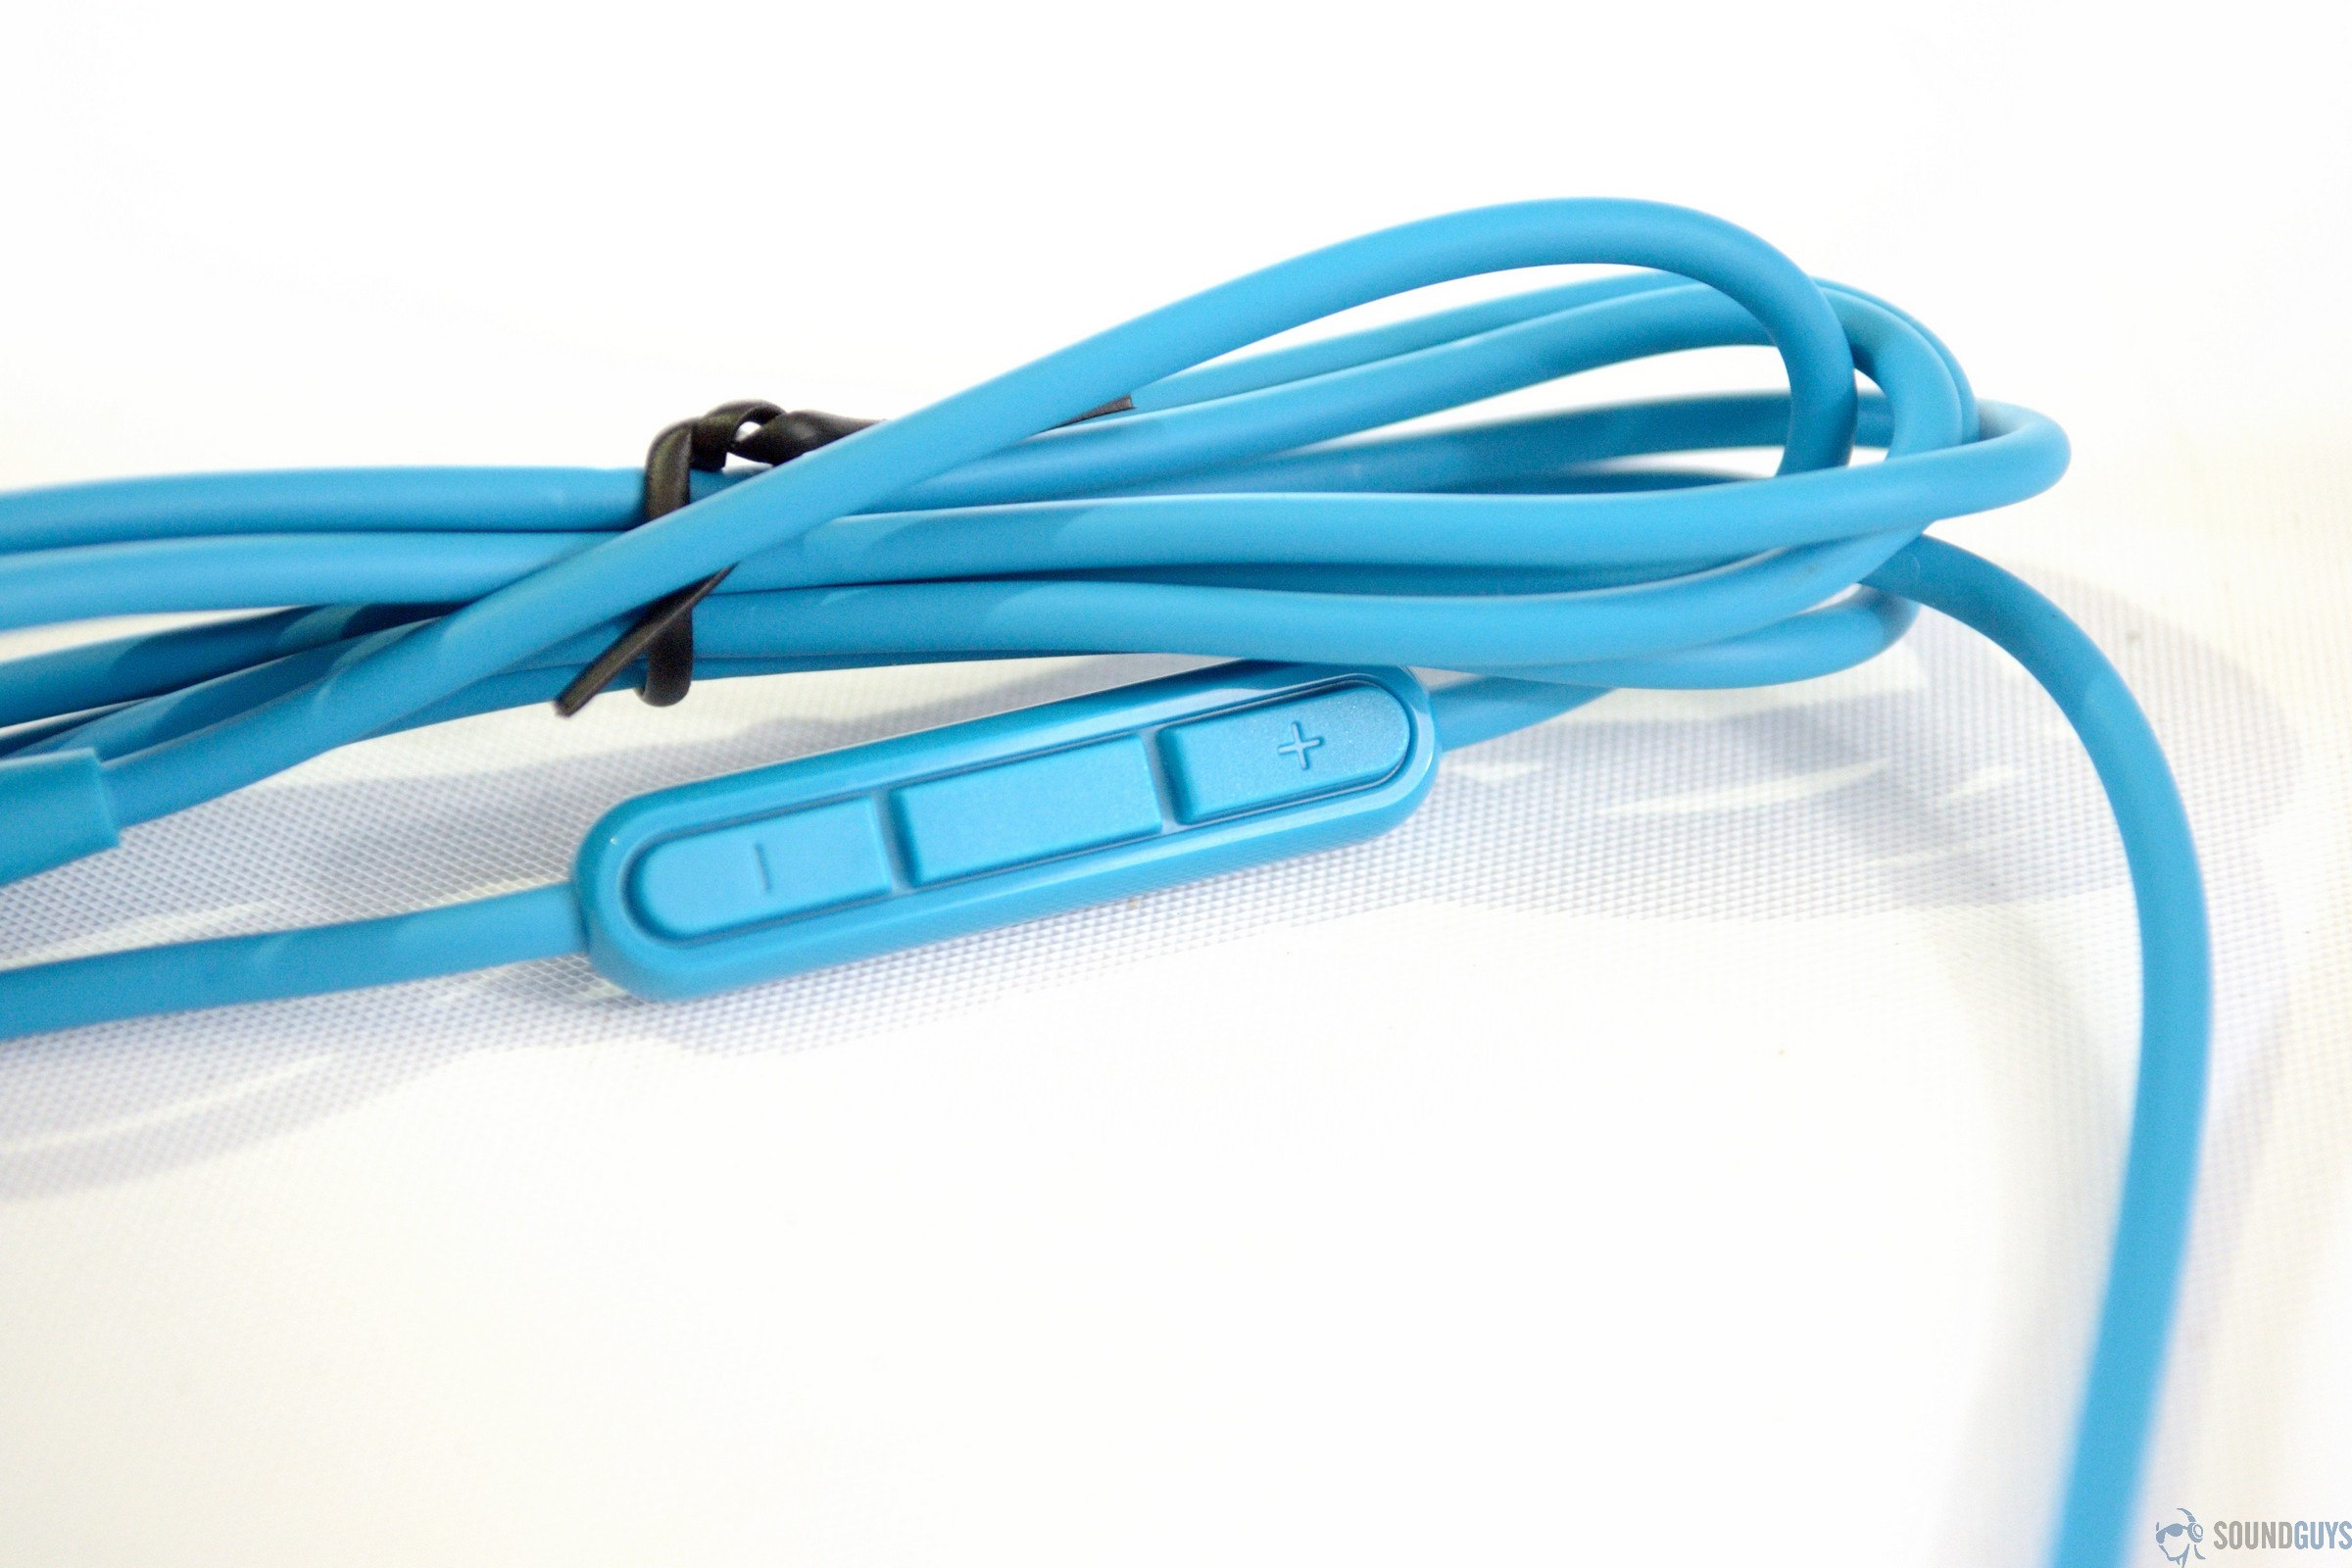 A photo of the bundled 3.5mm cable included with the Bose QuietComfort 25.